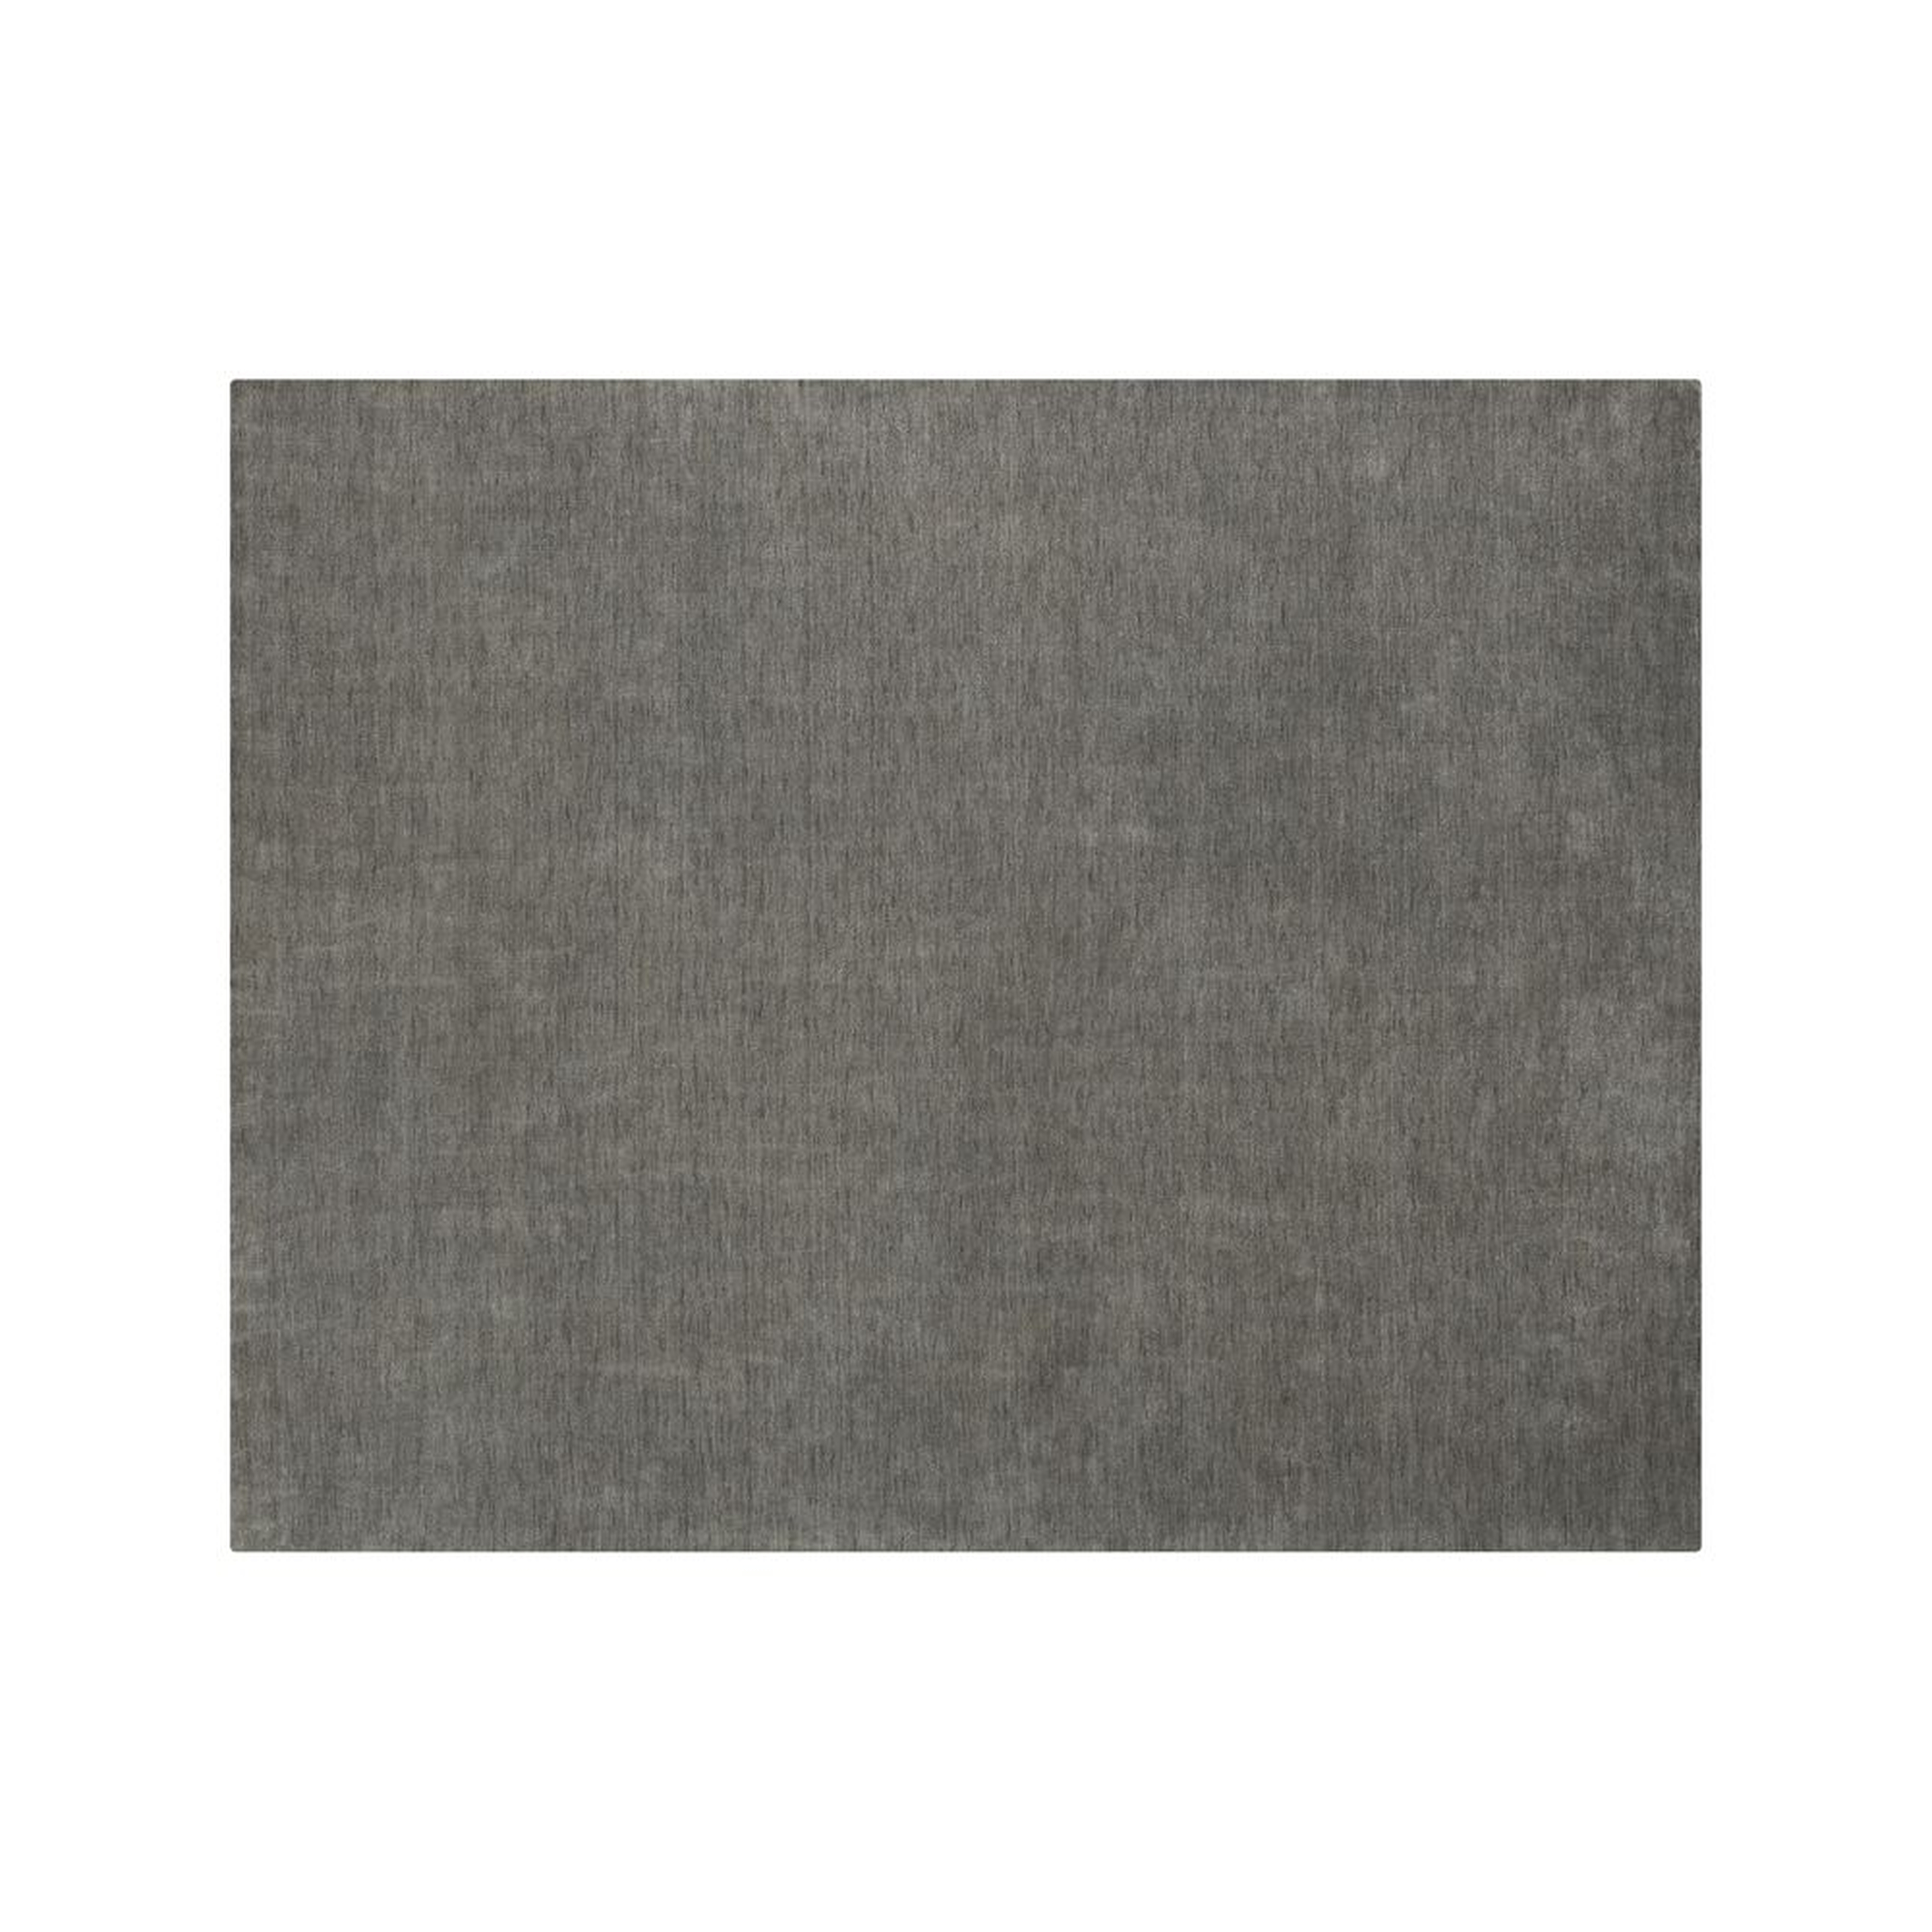 Baxter Grey Wool Area Rug 8'x10' - Crate and Barrel